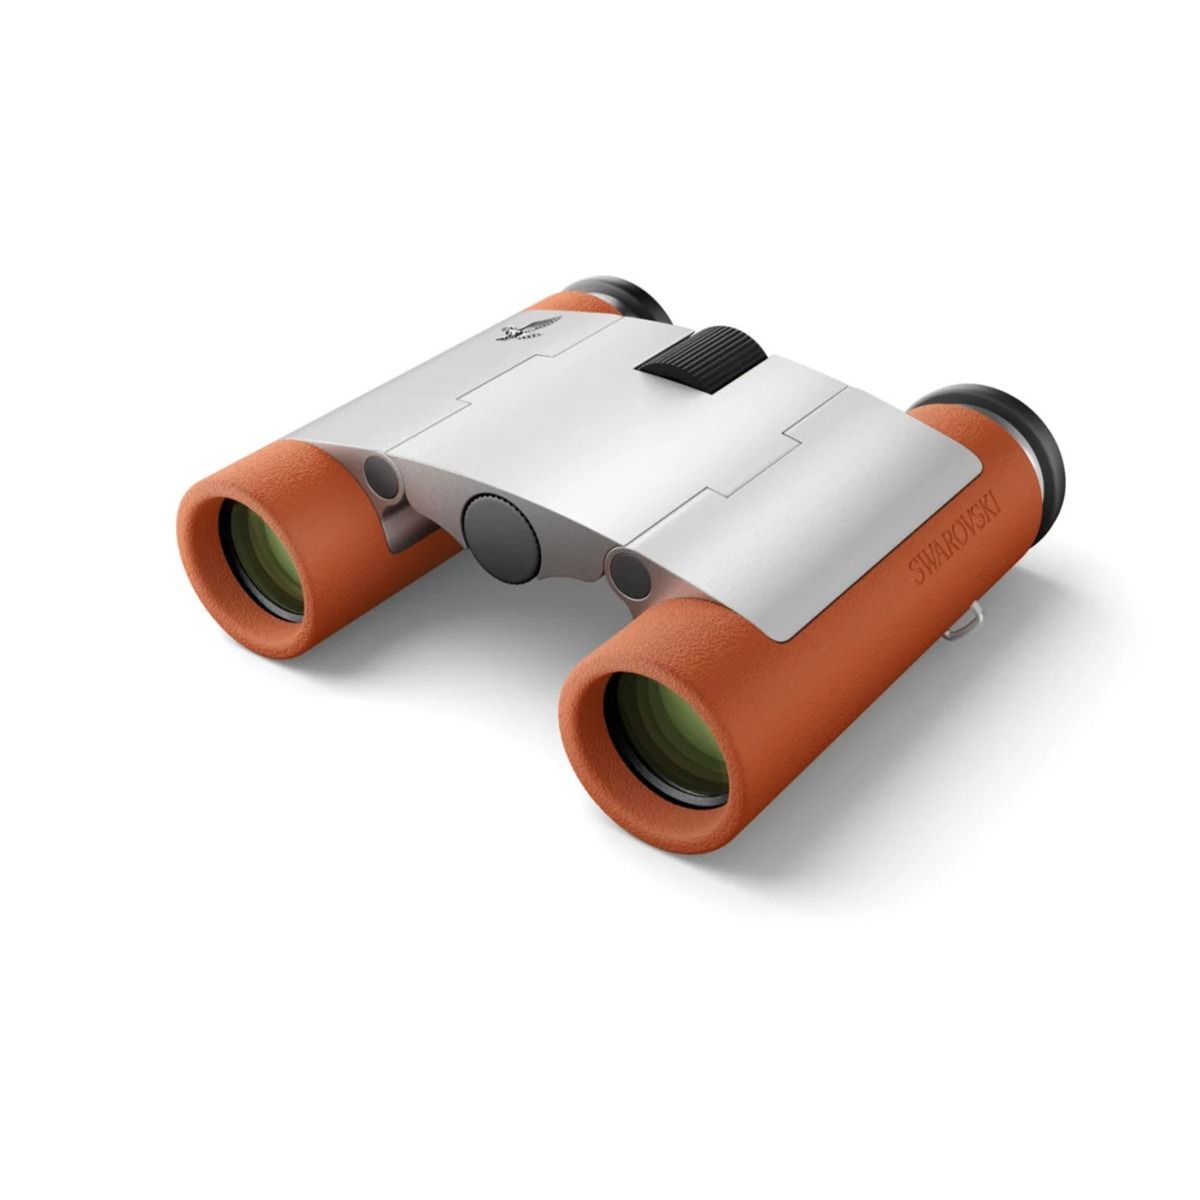 Swarovski 7x21 CL Curio compact binoculars - Burnt Orange - Product Photo 2 - Photo of the binoculars from a side perspective, resting on a notebook diagram to show the scale of the product 4 - Close up of the front of the binoculars showing the glass of the lens